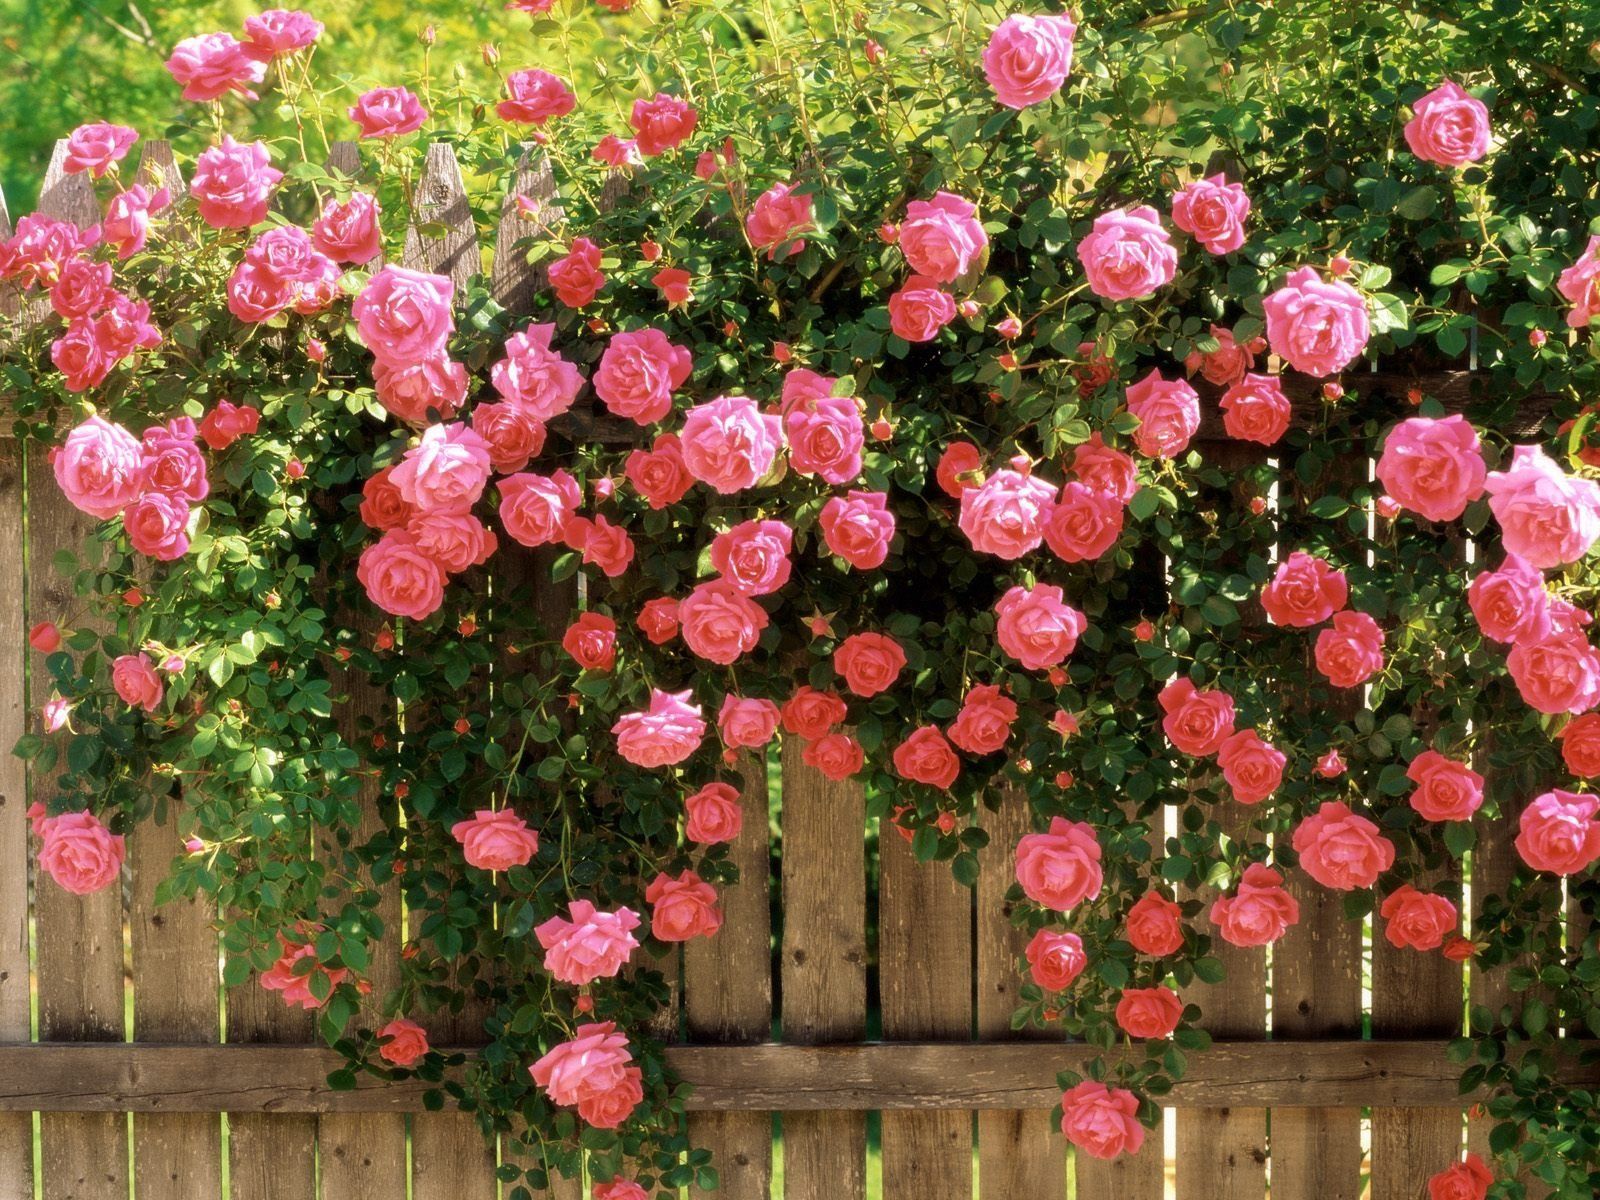 roses, flowers, greens, fence images